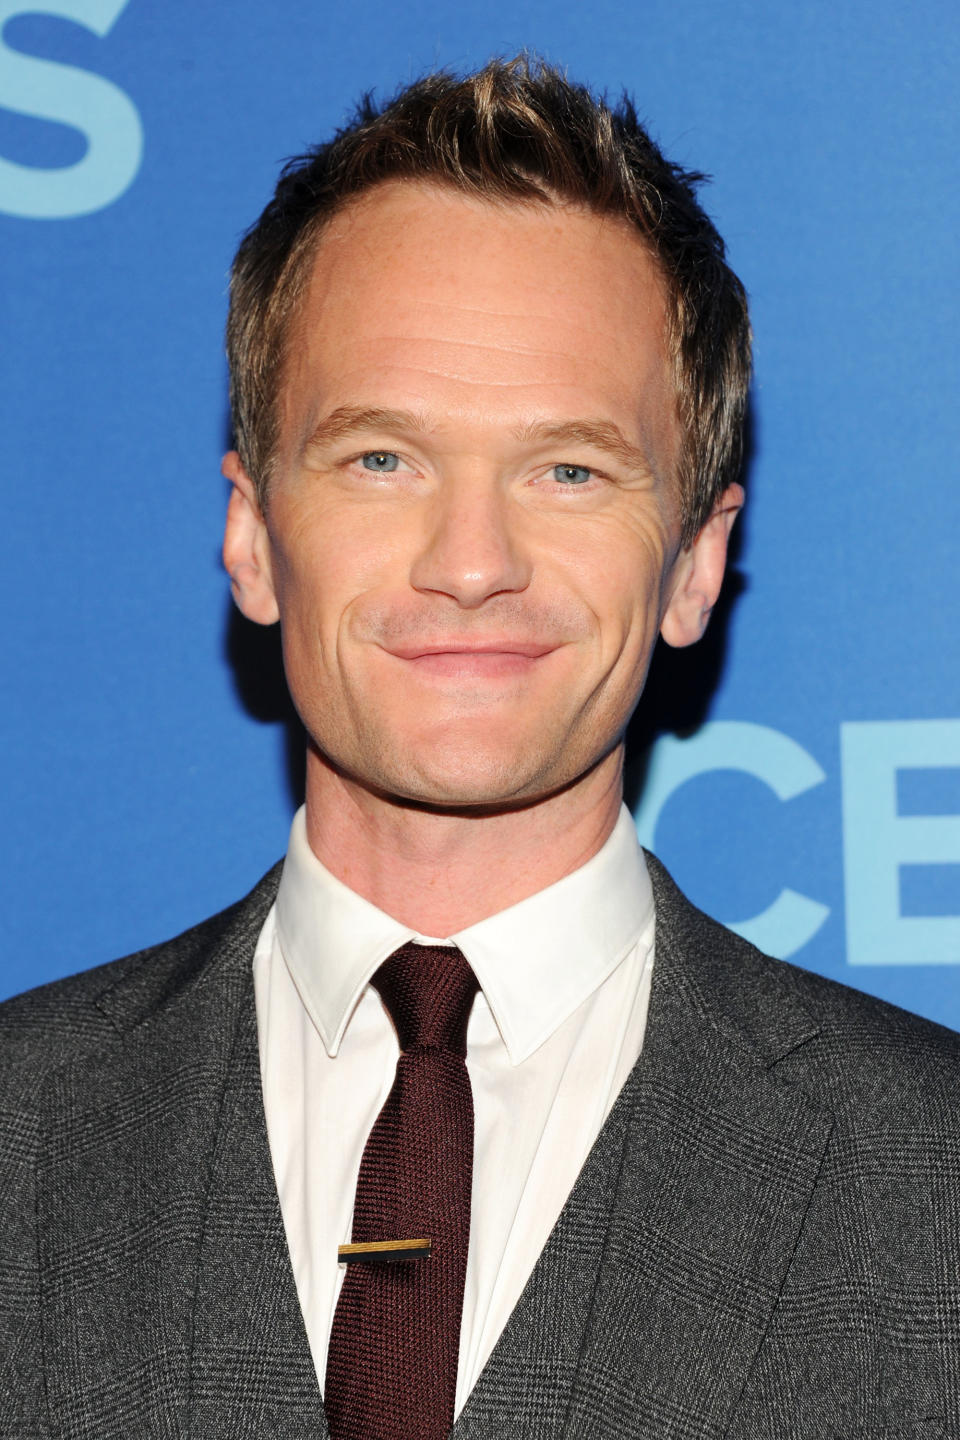 <strong>Now:</strong> He is best known for playing Barney Stinson in the US comedy series 'How I Met Your Mother' since 2005 for which he has been nominated for four Emmy Awards. 